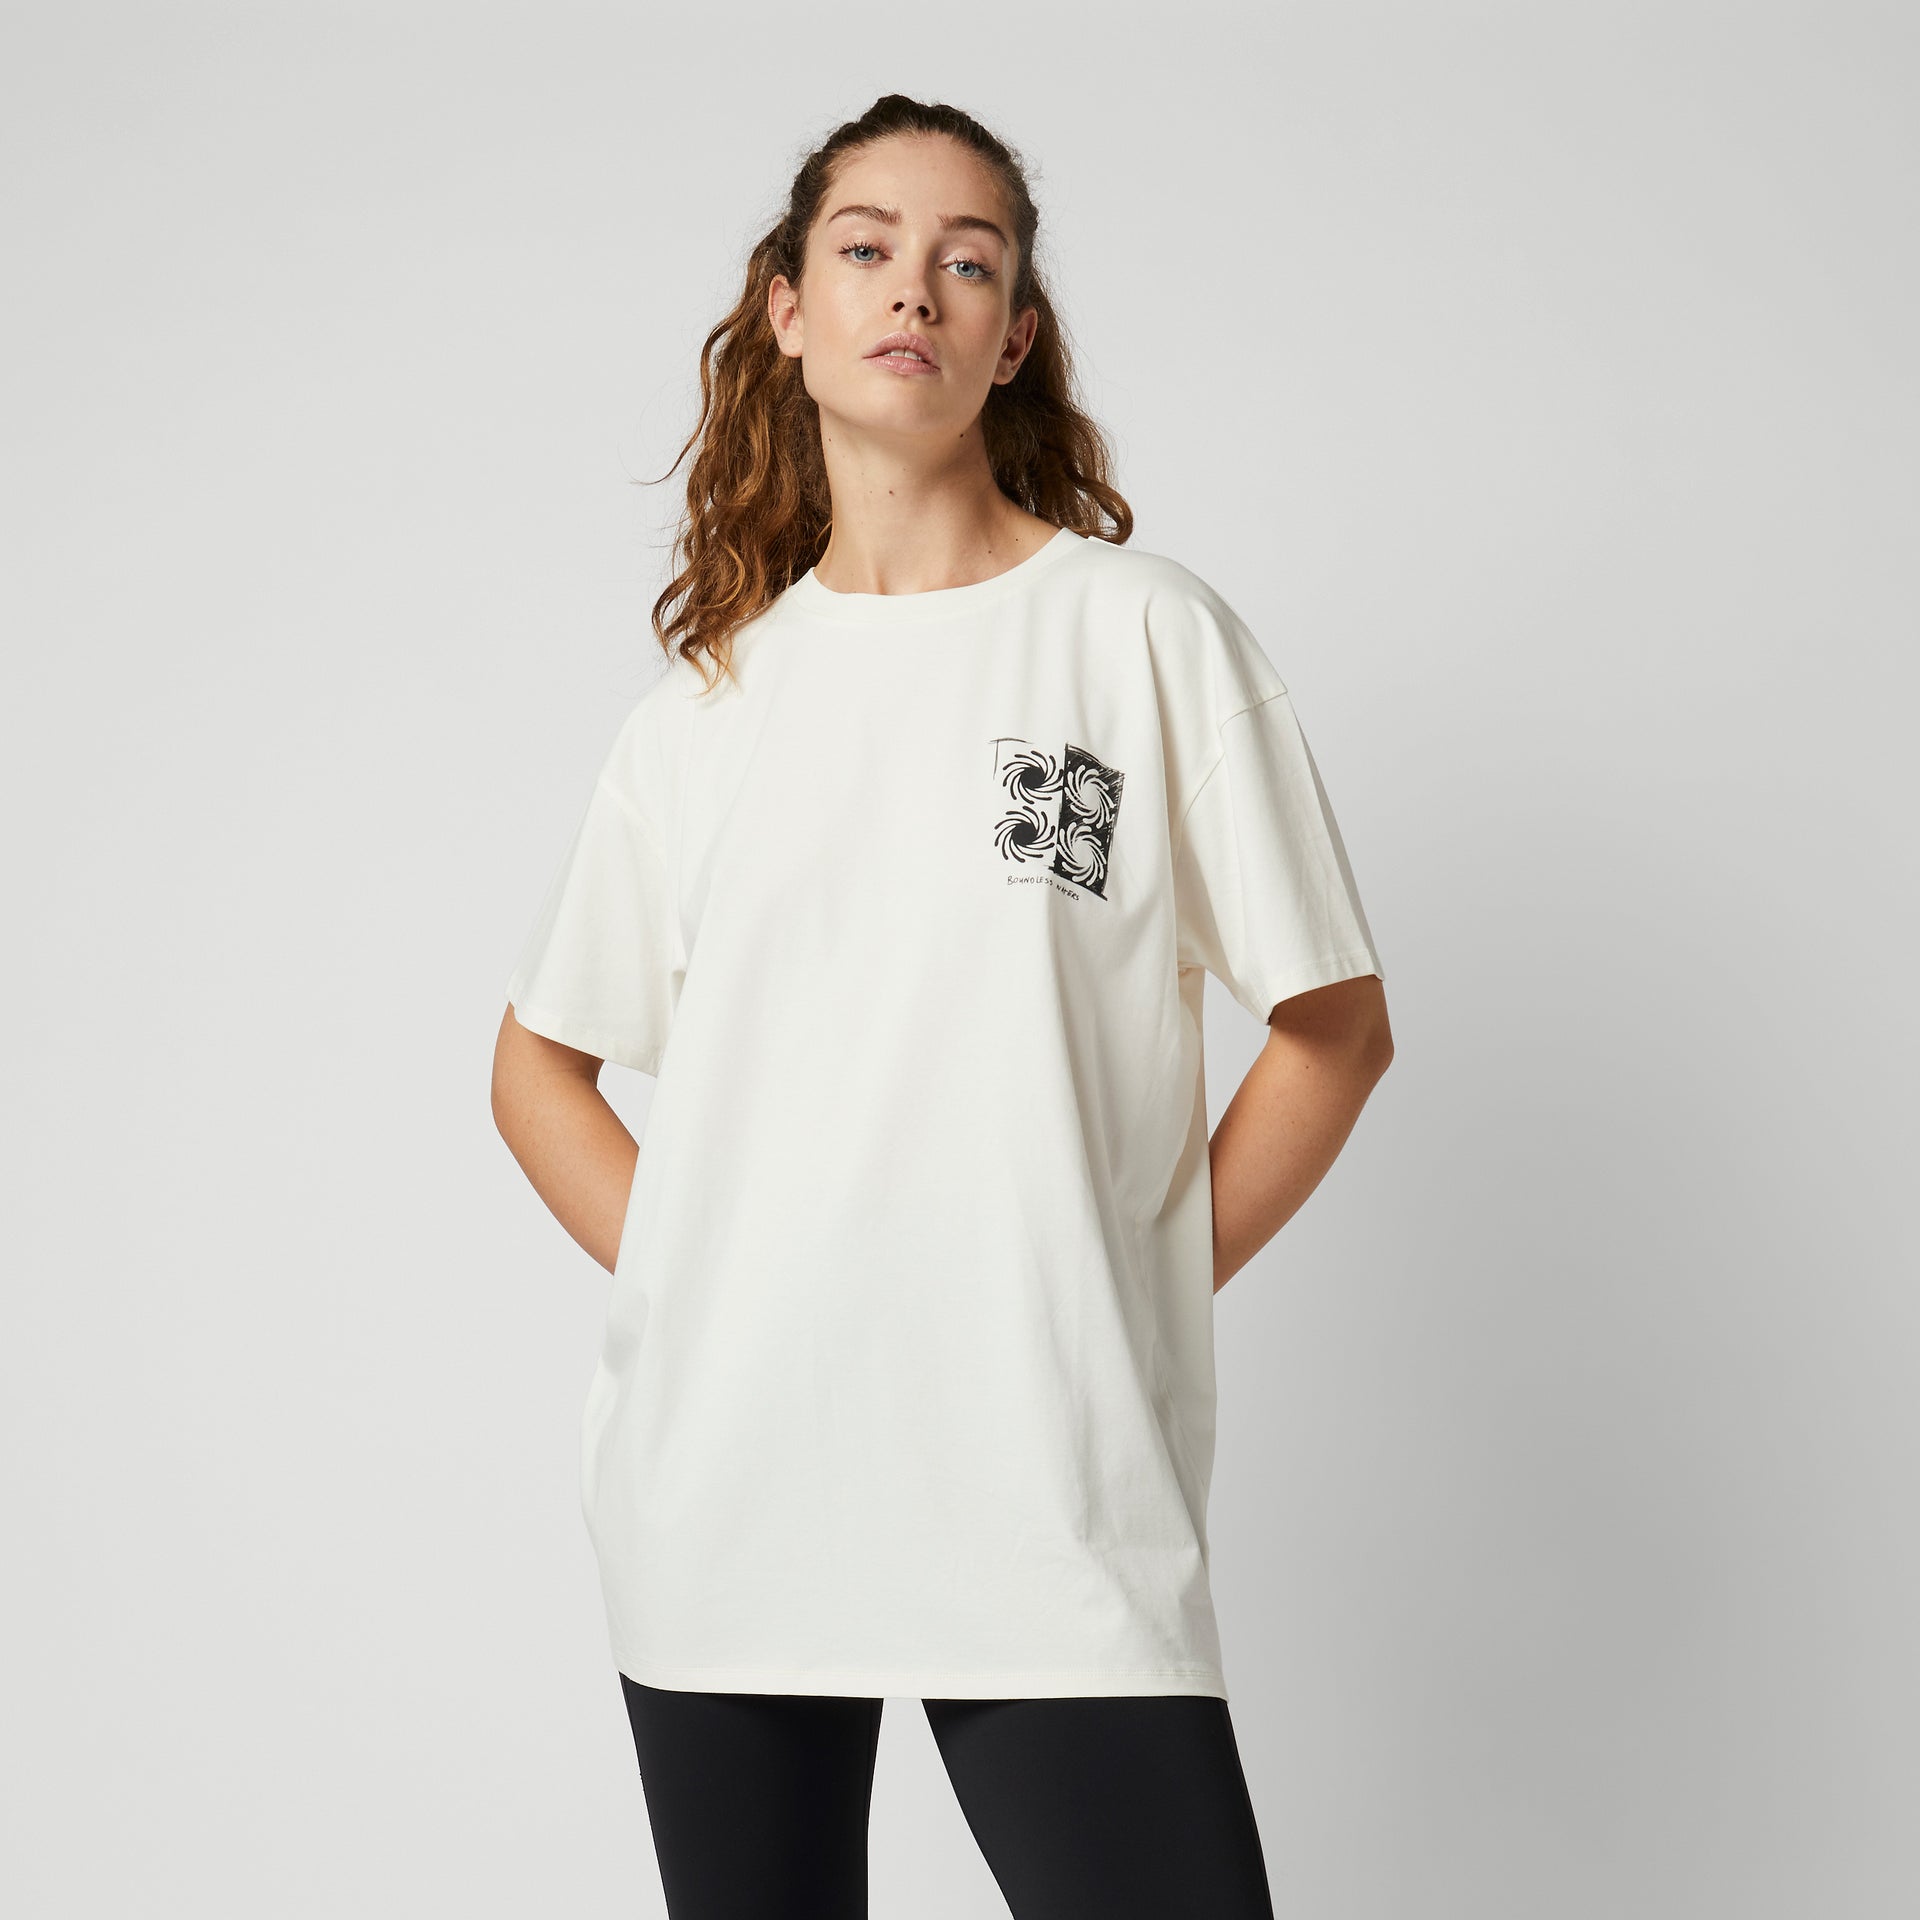 Product_image_3_Off White